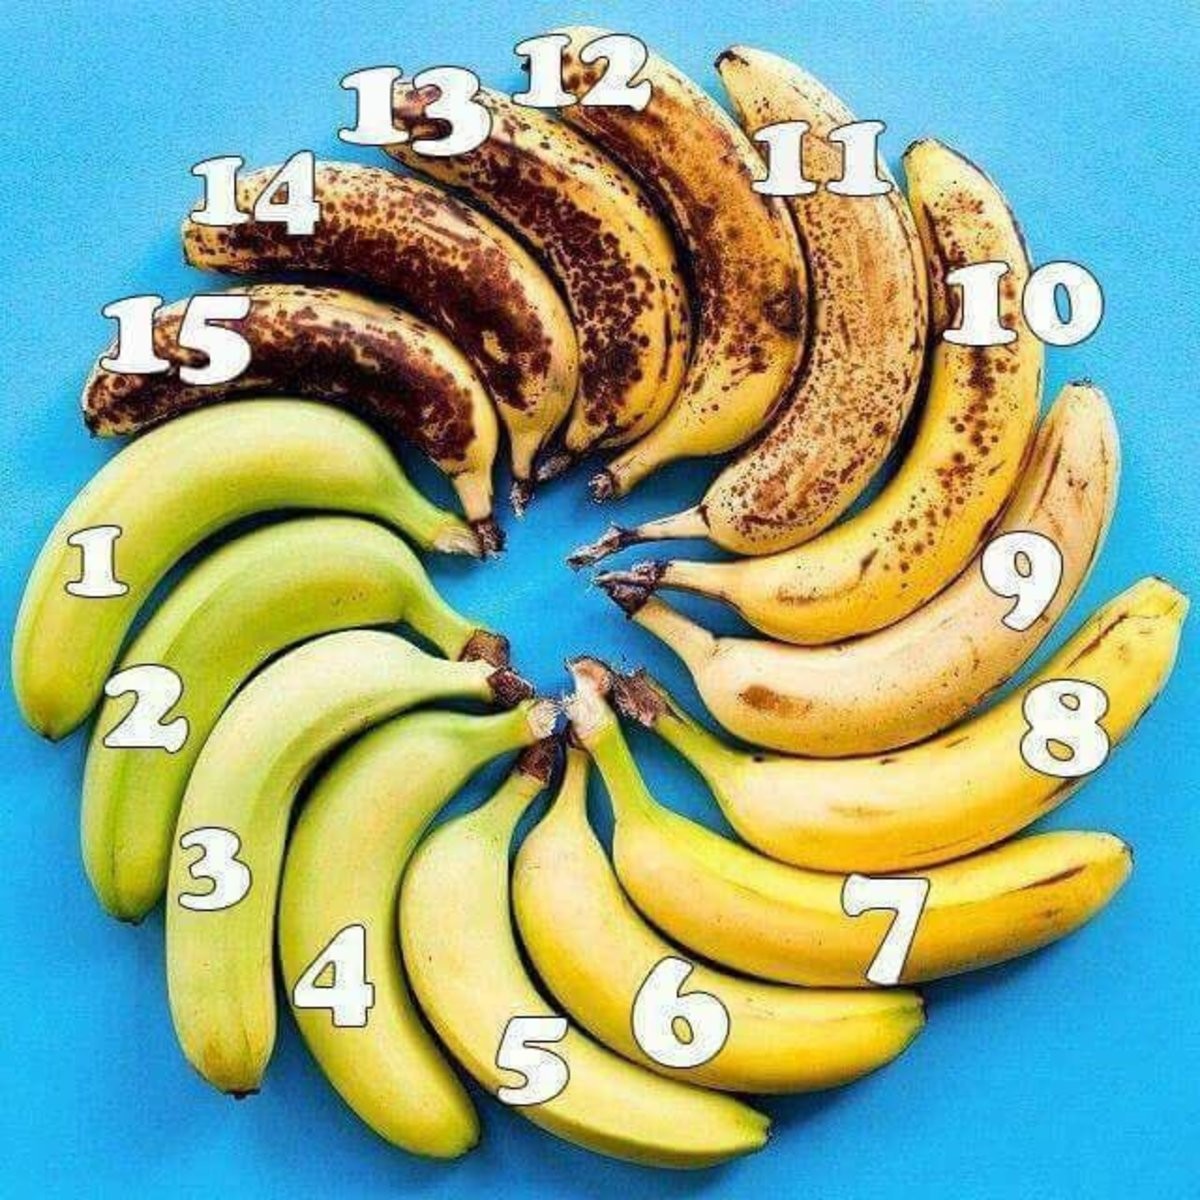 how ripe is your banana (͡° ͜ʖ ͡°). .. New Alt-Right hate symbol: the 15 spoke banana swastikaComment edited at .